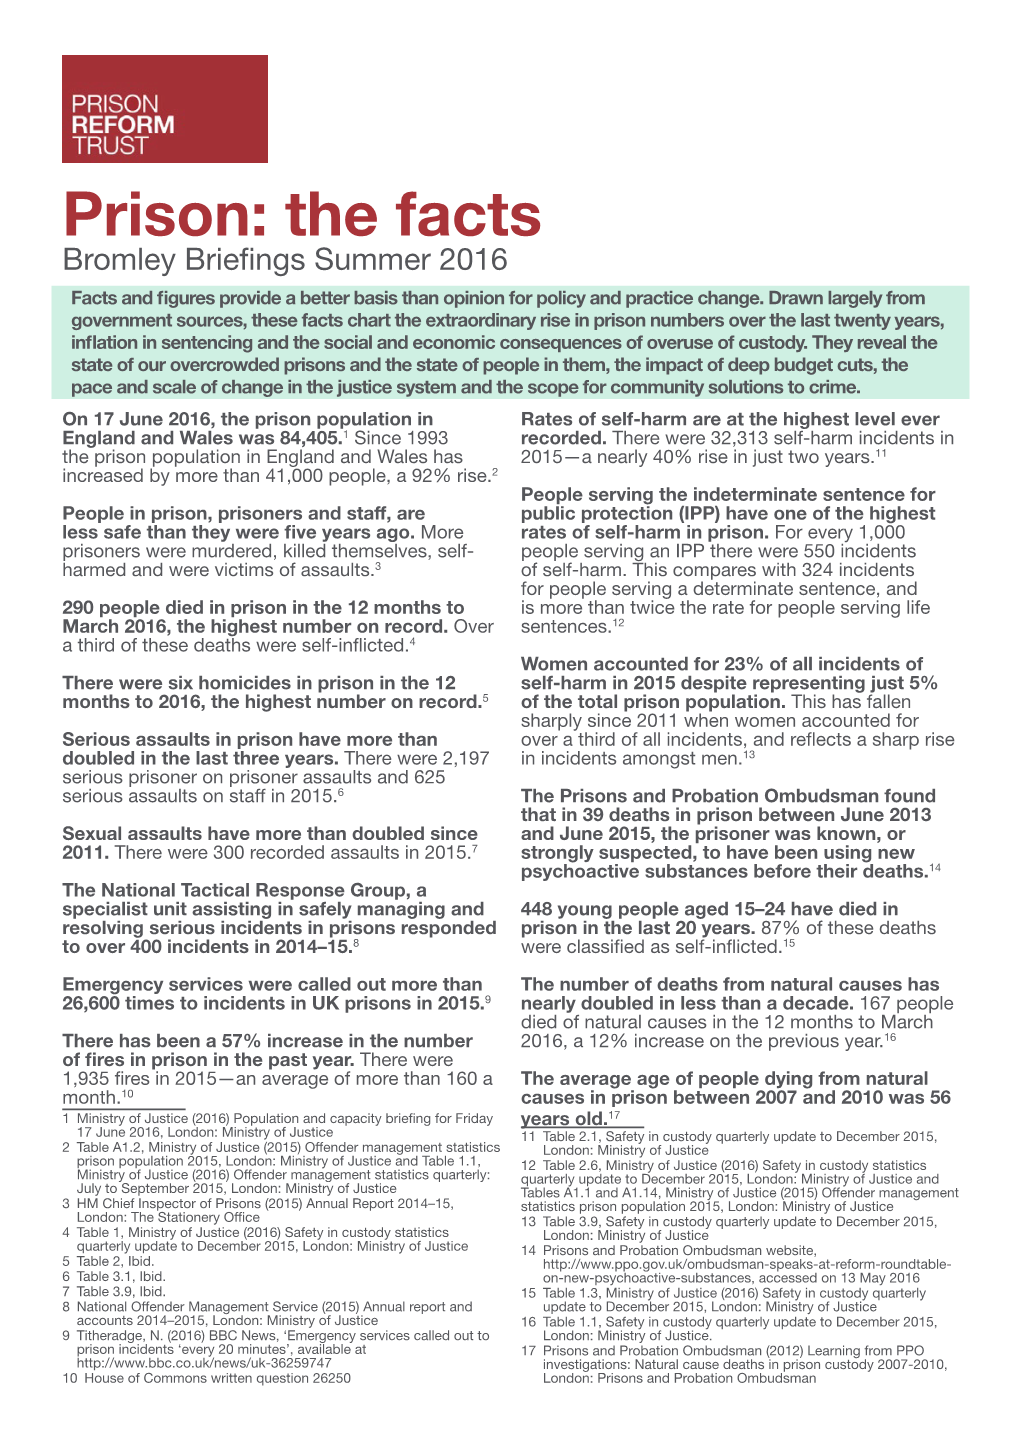 Prison: the Facts Bromley Briefings Summer 2016 Facts and Figures Provide a Better Basis Than Opinion for Policy and Practice Change